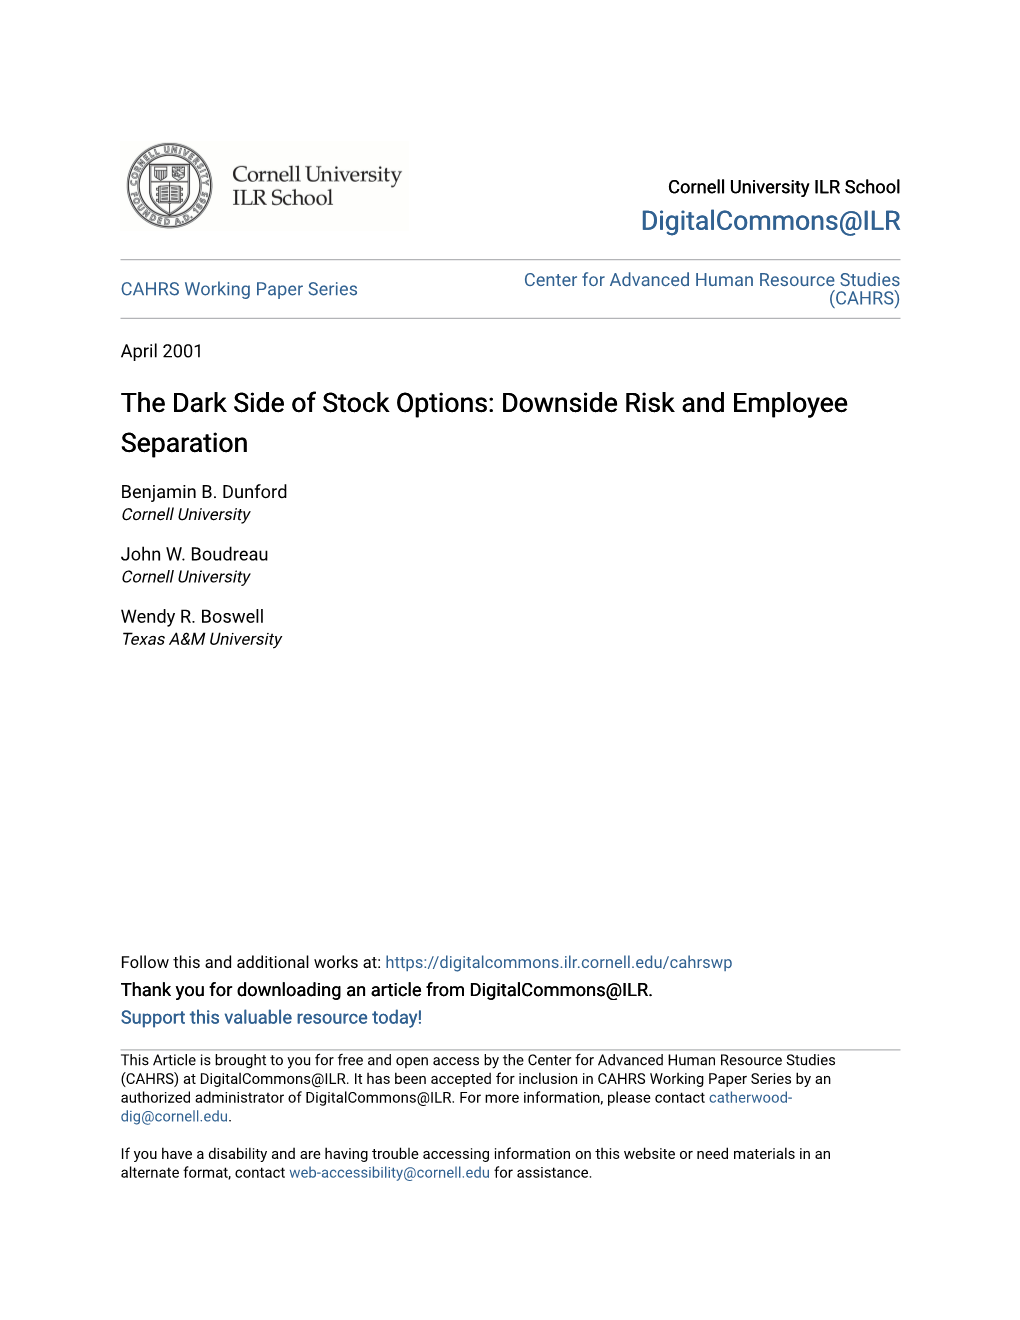 The Dark Side of Stock Options: Downside Risk and Employee Separation